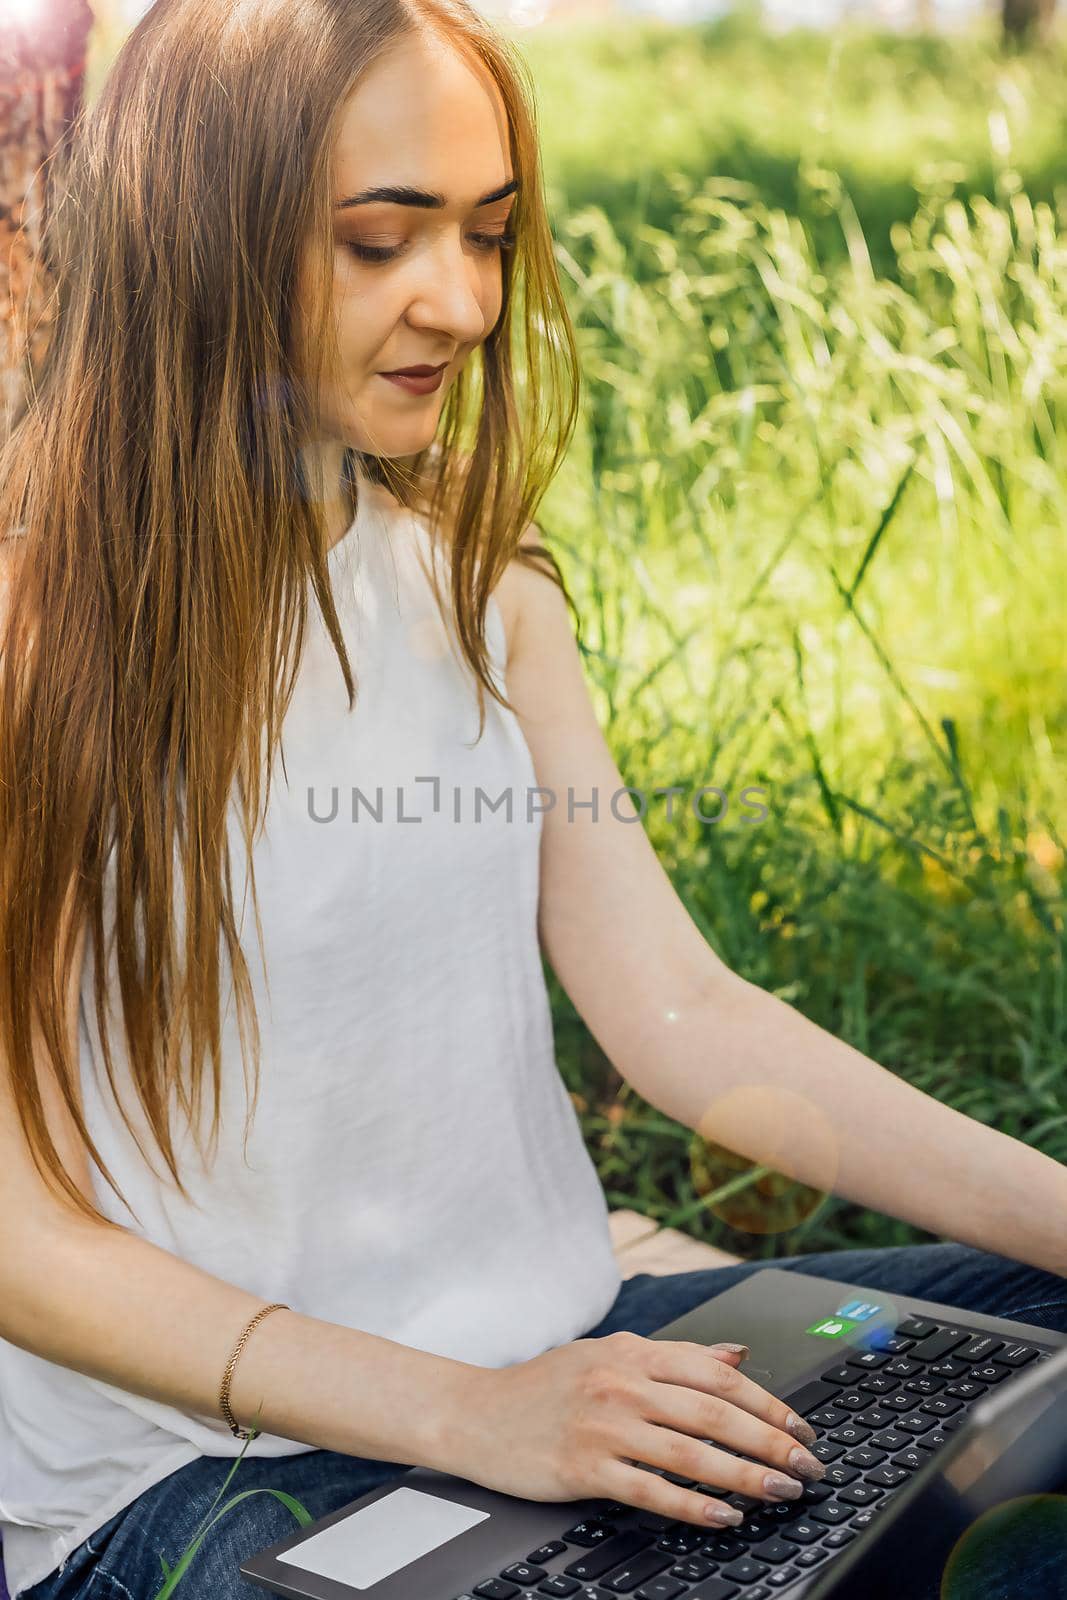 On the banner, a young girl works with a laptop in the fresh air in the park, sitting on the lawn. The concept of remote work. Work as a freelancer. The girl takes courses on a laptop and smiles